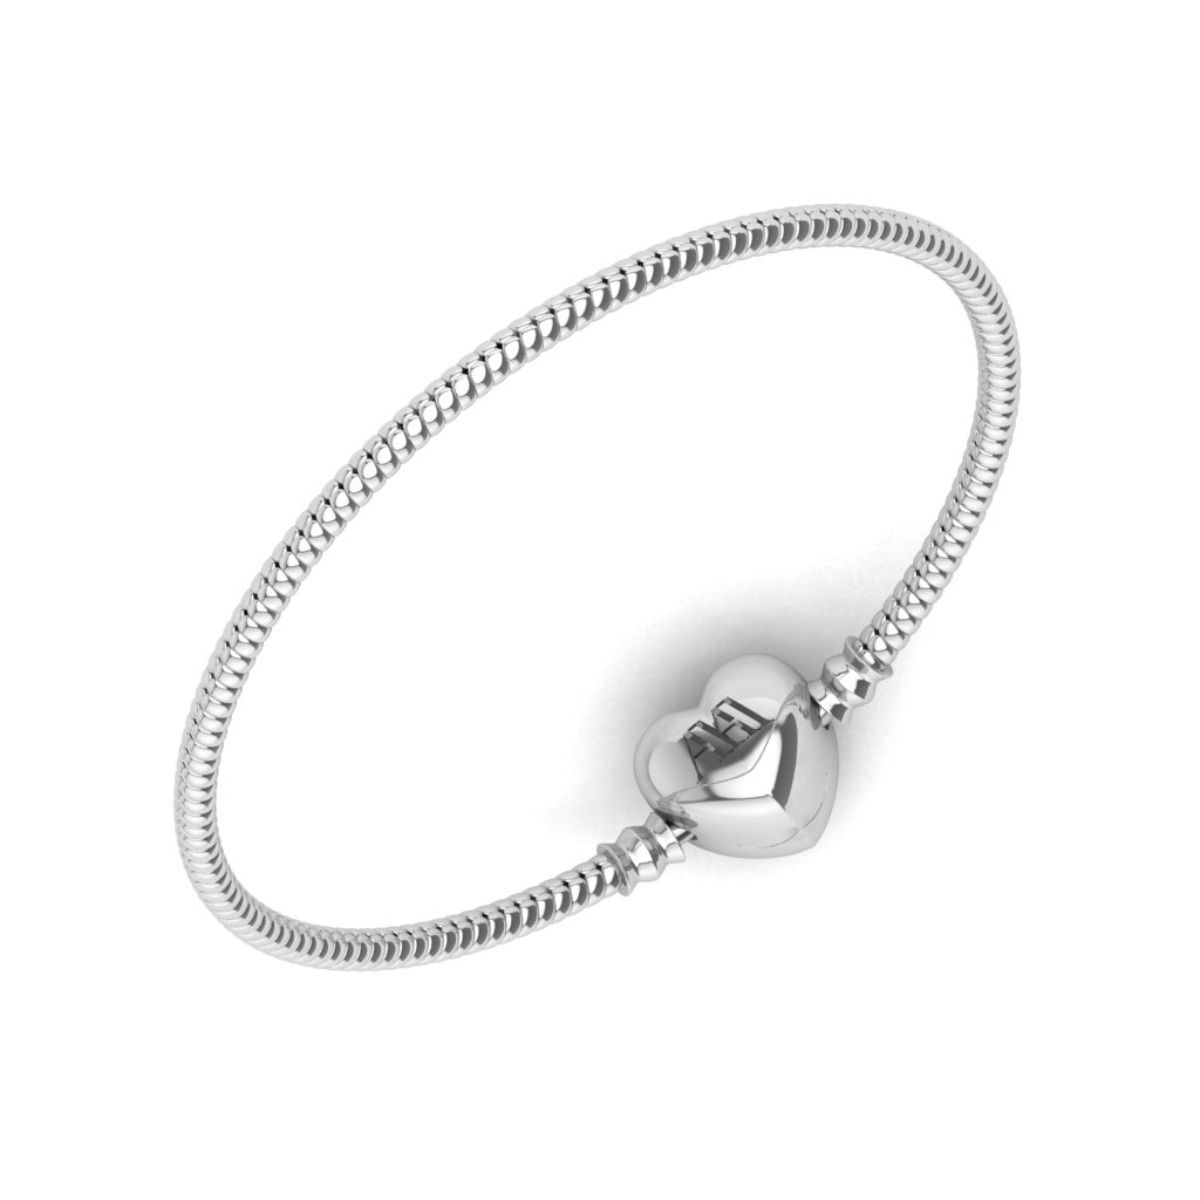 Praavy 925 Sterling Silver Original Charm Bracelet p19b0288 Buy Praavy  925 Sterling Silver Original Charm Bracelet p19b0288 Online at Best Price  in India  Nykaa